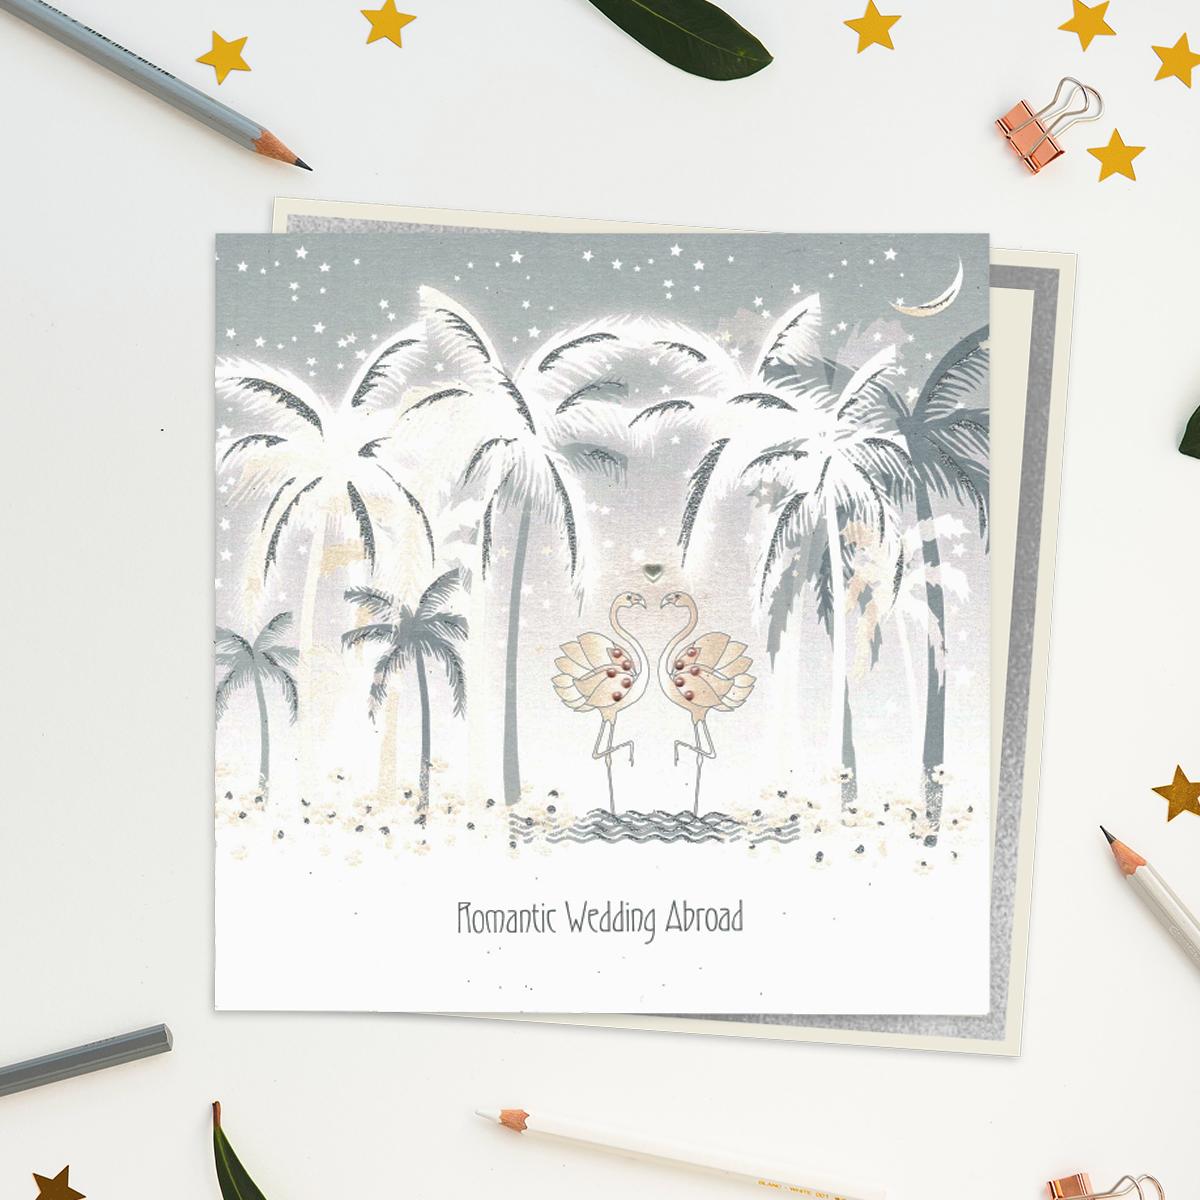 A Stunning, Luxury, Handcrafted Wedding Day Card In Soft Grey With Pink Showing Sparkling Palm Trees And Two Jewelled Flamingos On The Beach. Caption: Romantic Wedding Abroad. With Biodegradable Glitter And Compostable Wrap. Blank Inside For Own Message. Warm White Envelope With Silver Border.